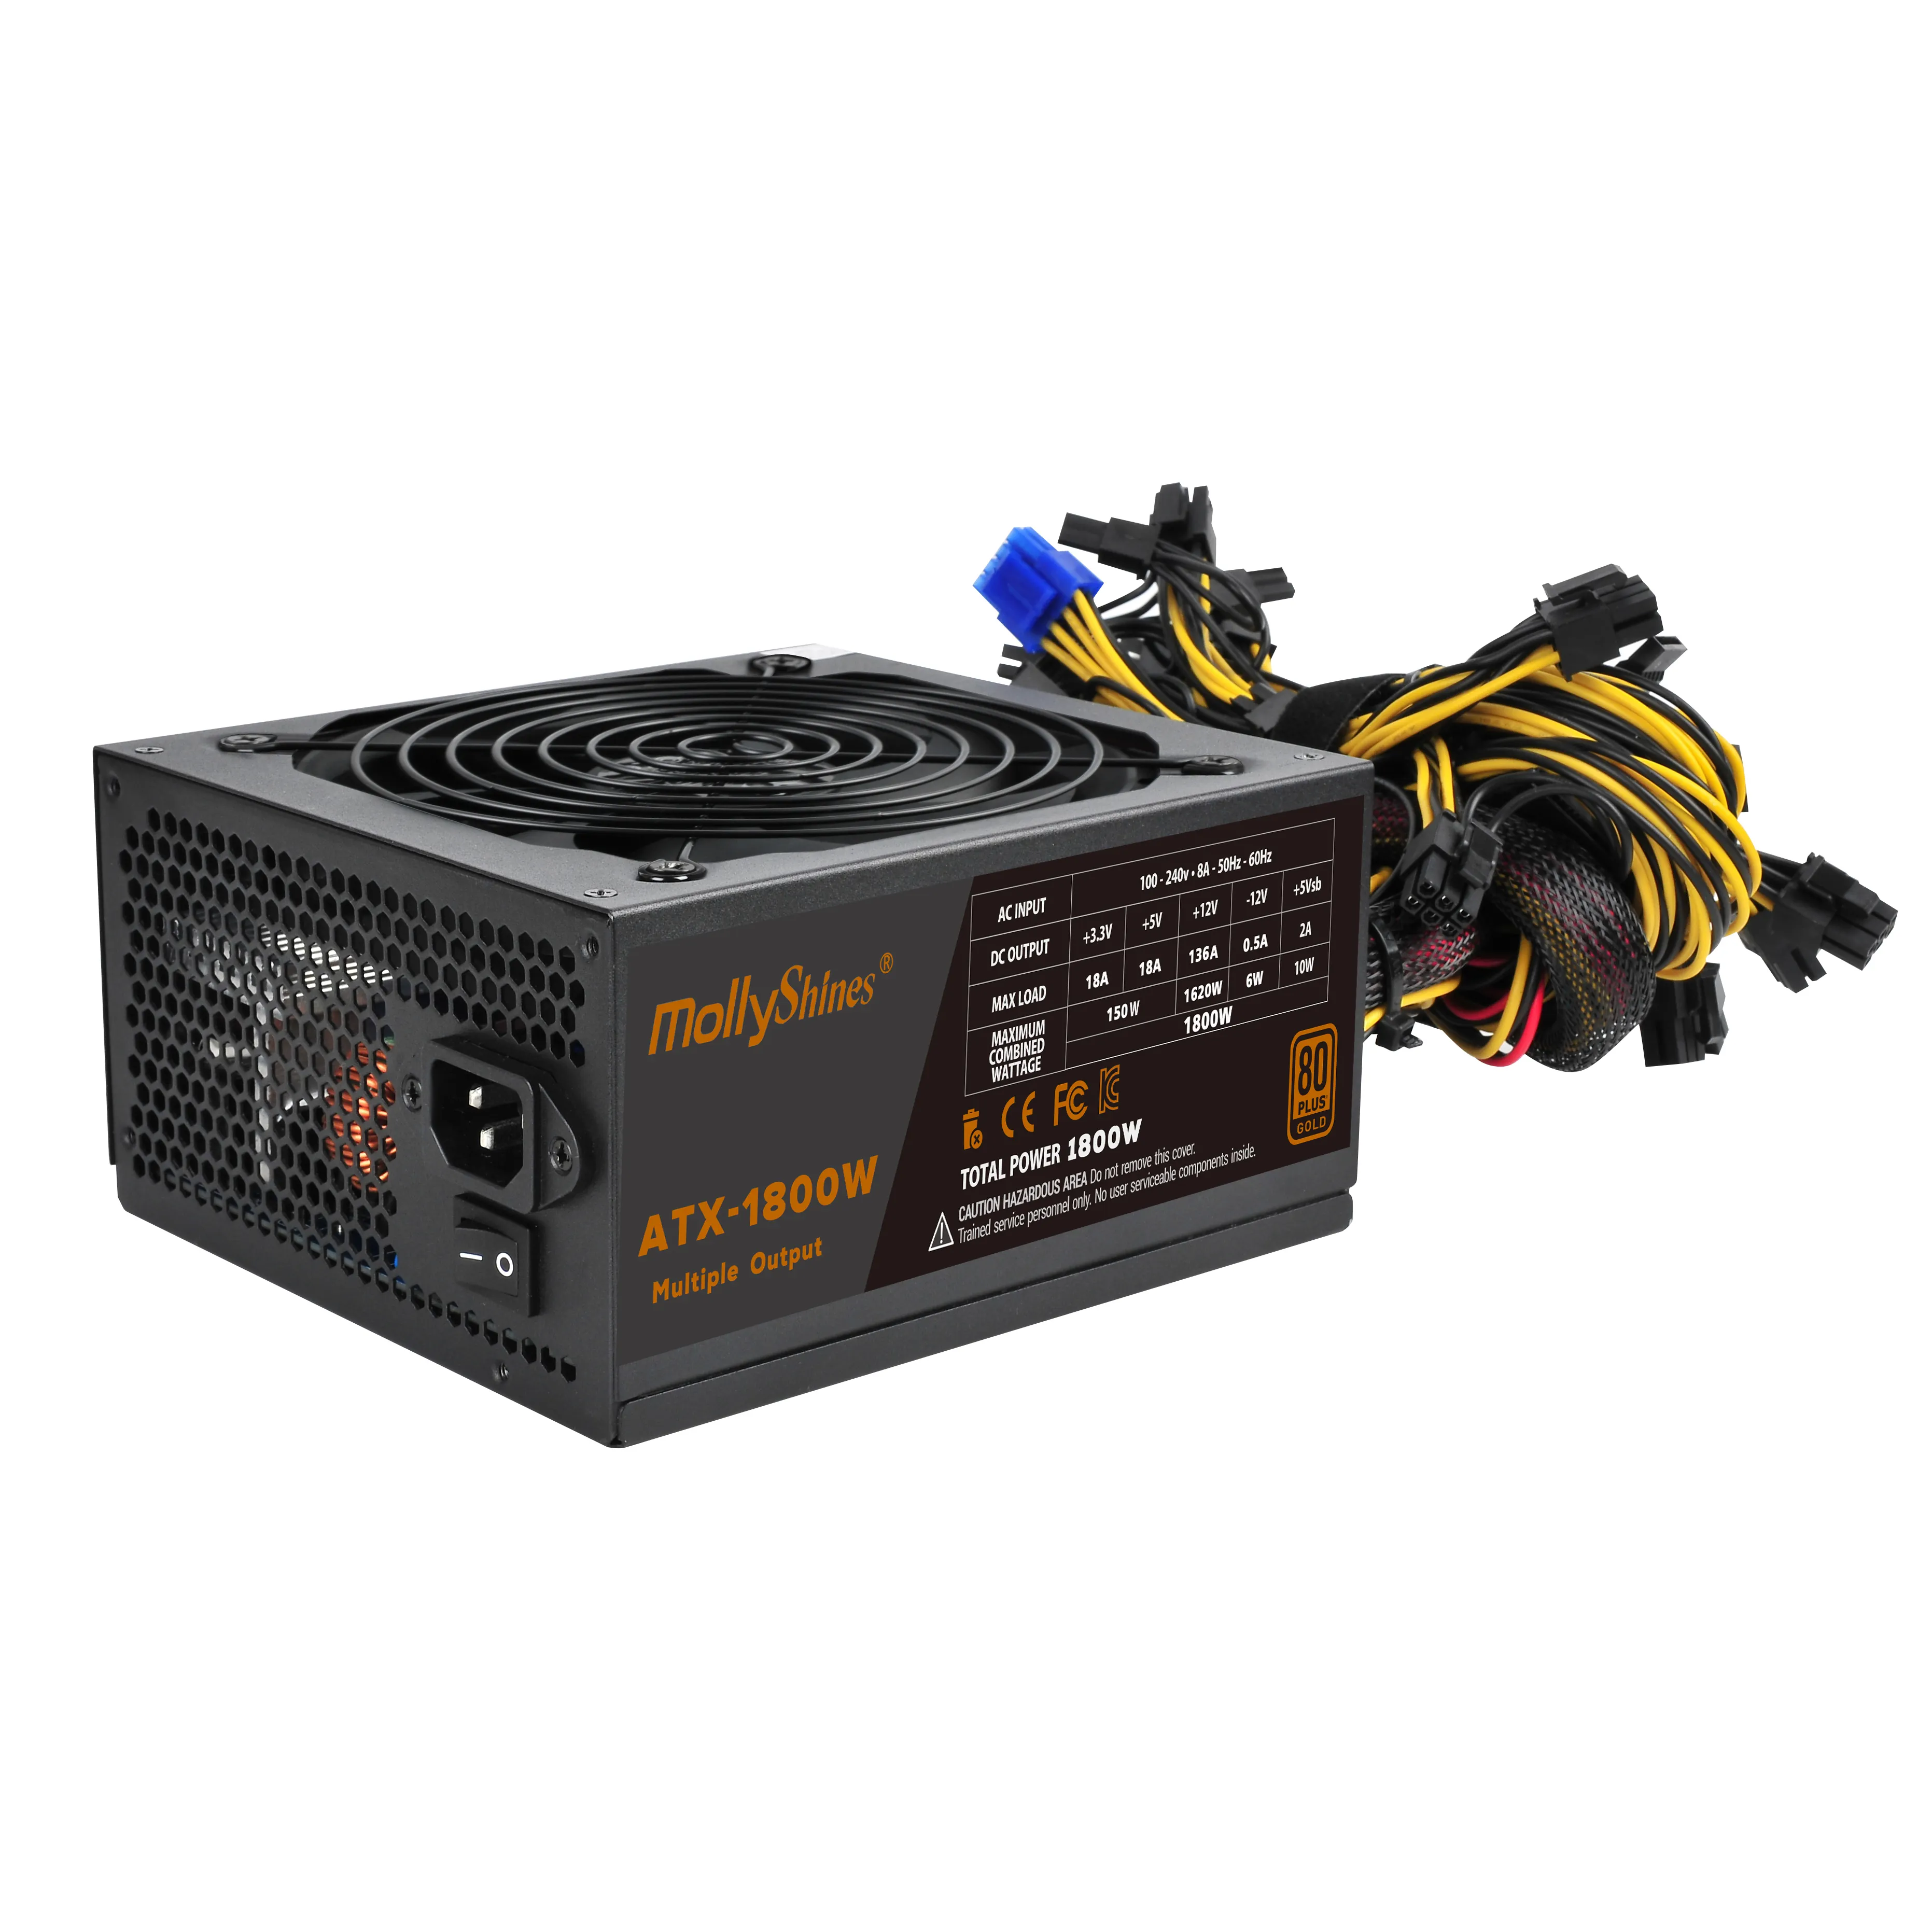 Industrial PC Machine Accoriess Power Supply 1800W Multiple Output High Efficiency